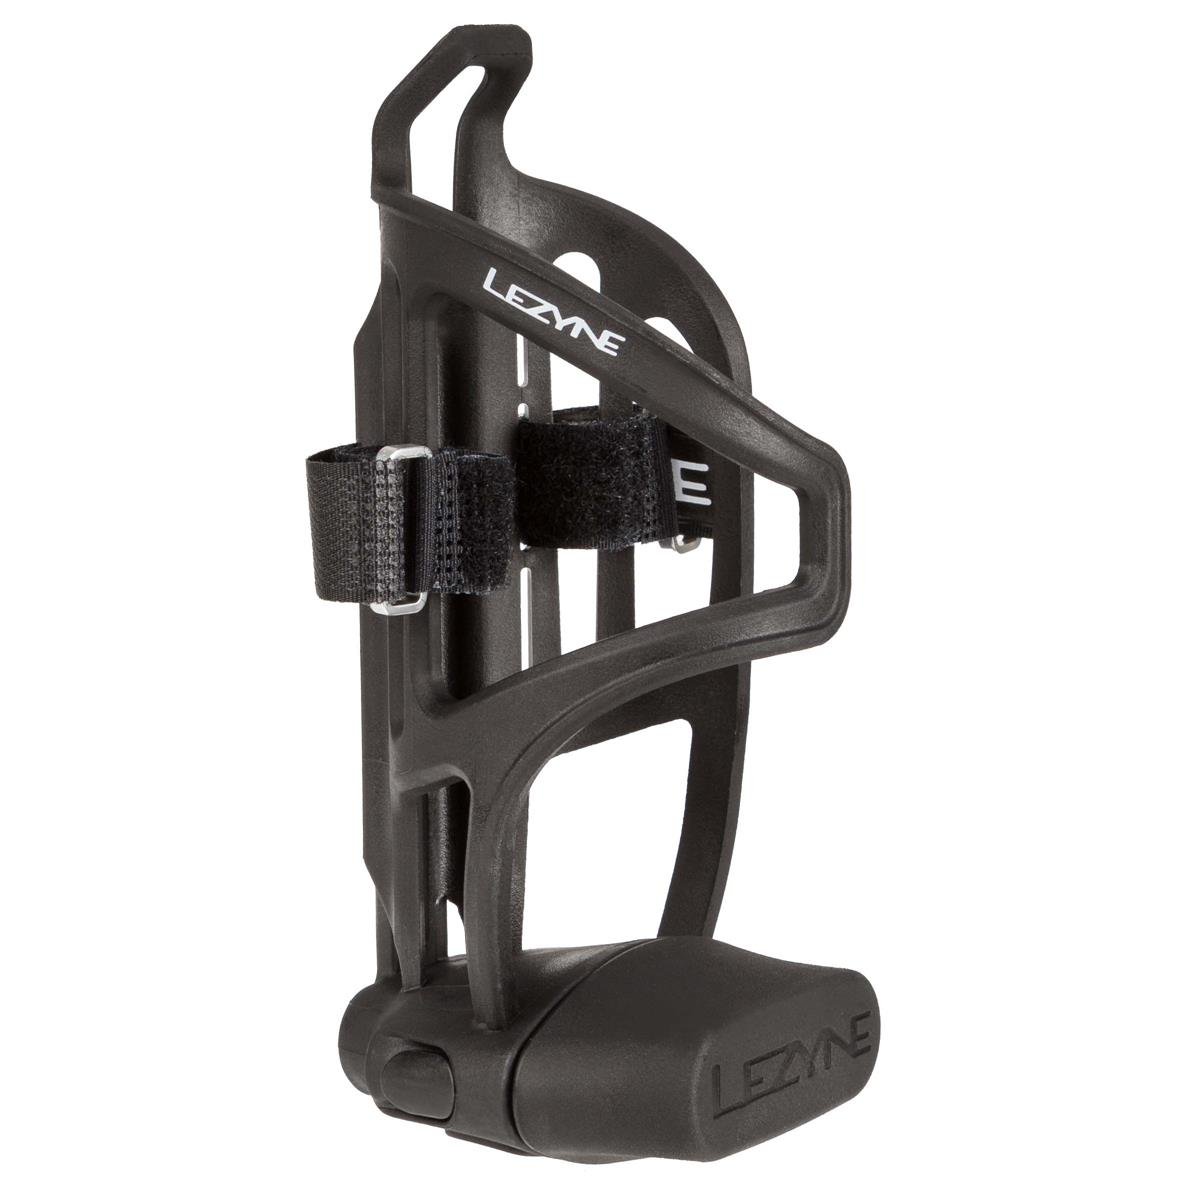 Lezyne Bottle Cage Flow Storage Cage integrated Storage Container, Black